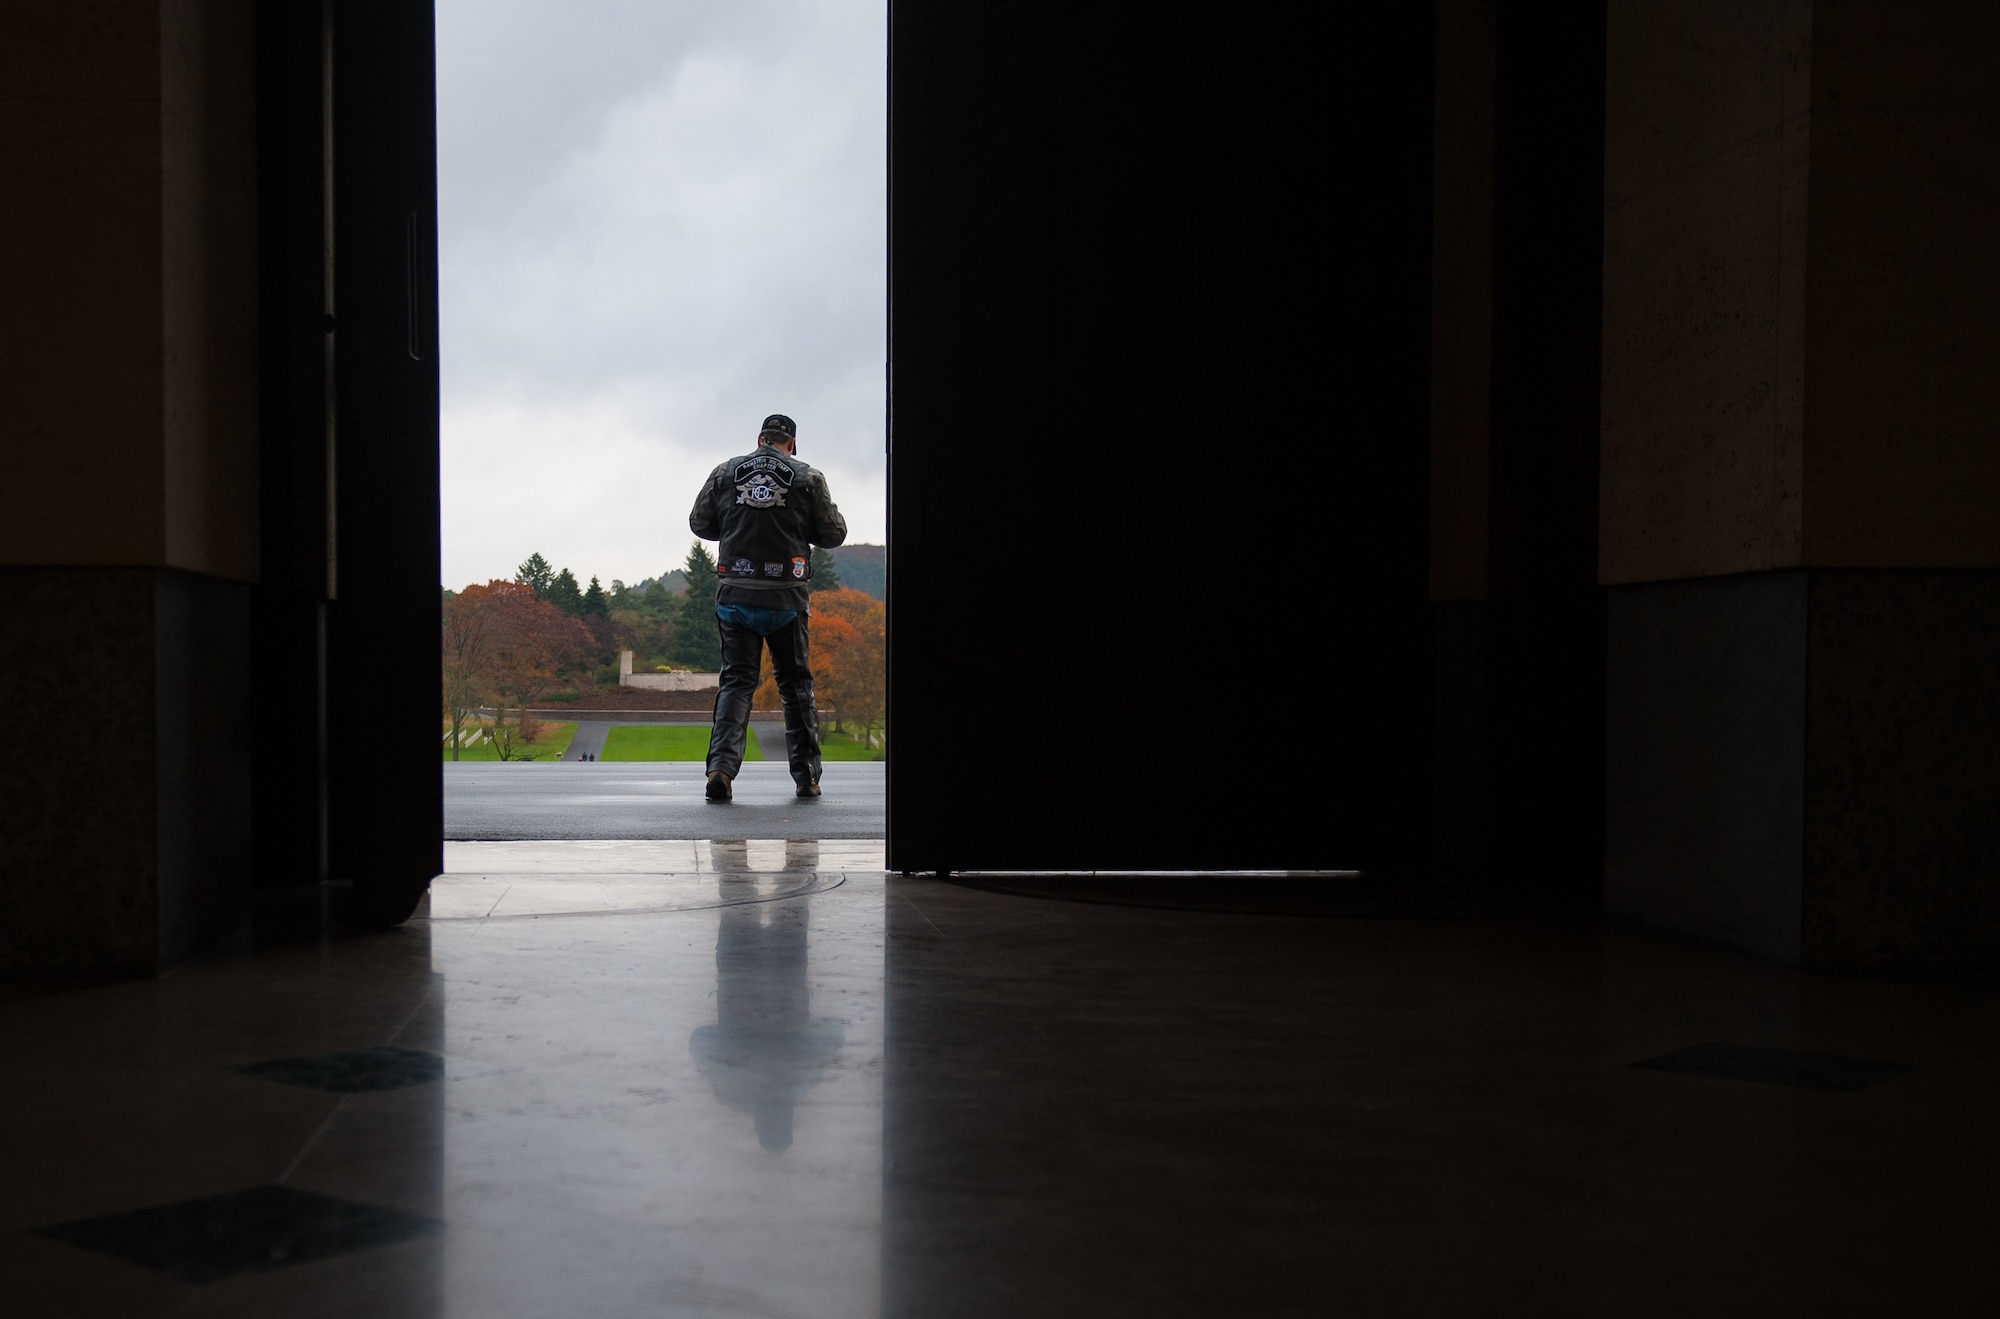 A member of the Ramstein military motorcycle club from the Kaiserslautern Military community visits the Lorraine American Cemetery to pay respect to deceased war veterans Nov. 11, 2016, at St. Avold, France. Veterans Day is observed annually on November 11 and commemorates military veterans who currently serve or have served the U.S. armed forces, including those who gave the ultimate sacrifice. According to the DoD and Veterans Administration, since World War I, approximately 624,000 U.S. servicemembers have been killed in action battling in wars and conflicts. The Lorraine American Cemetery contains the buried remains of over 10,000 of them. It is the largest burial site of U.S. servicemembers in Europe. (U.S. Air Force photo by Airman 1st Class Lane T. Plummer)